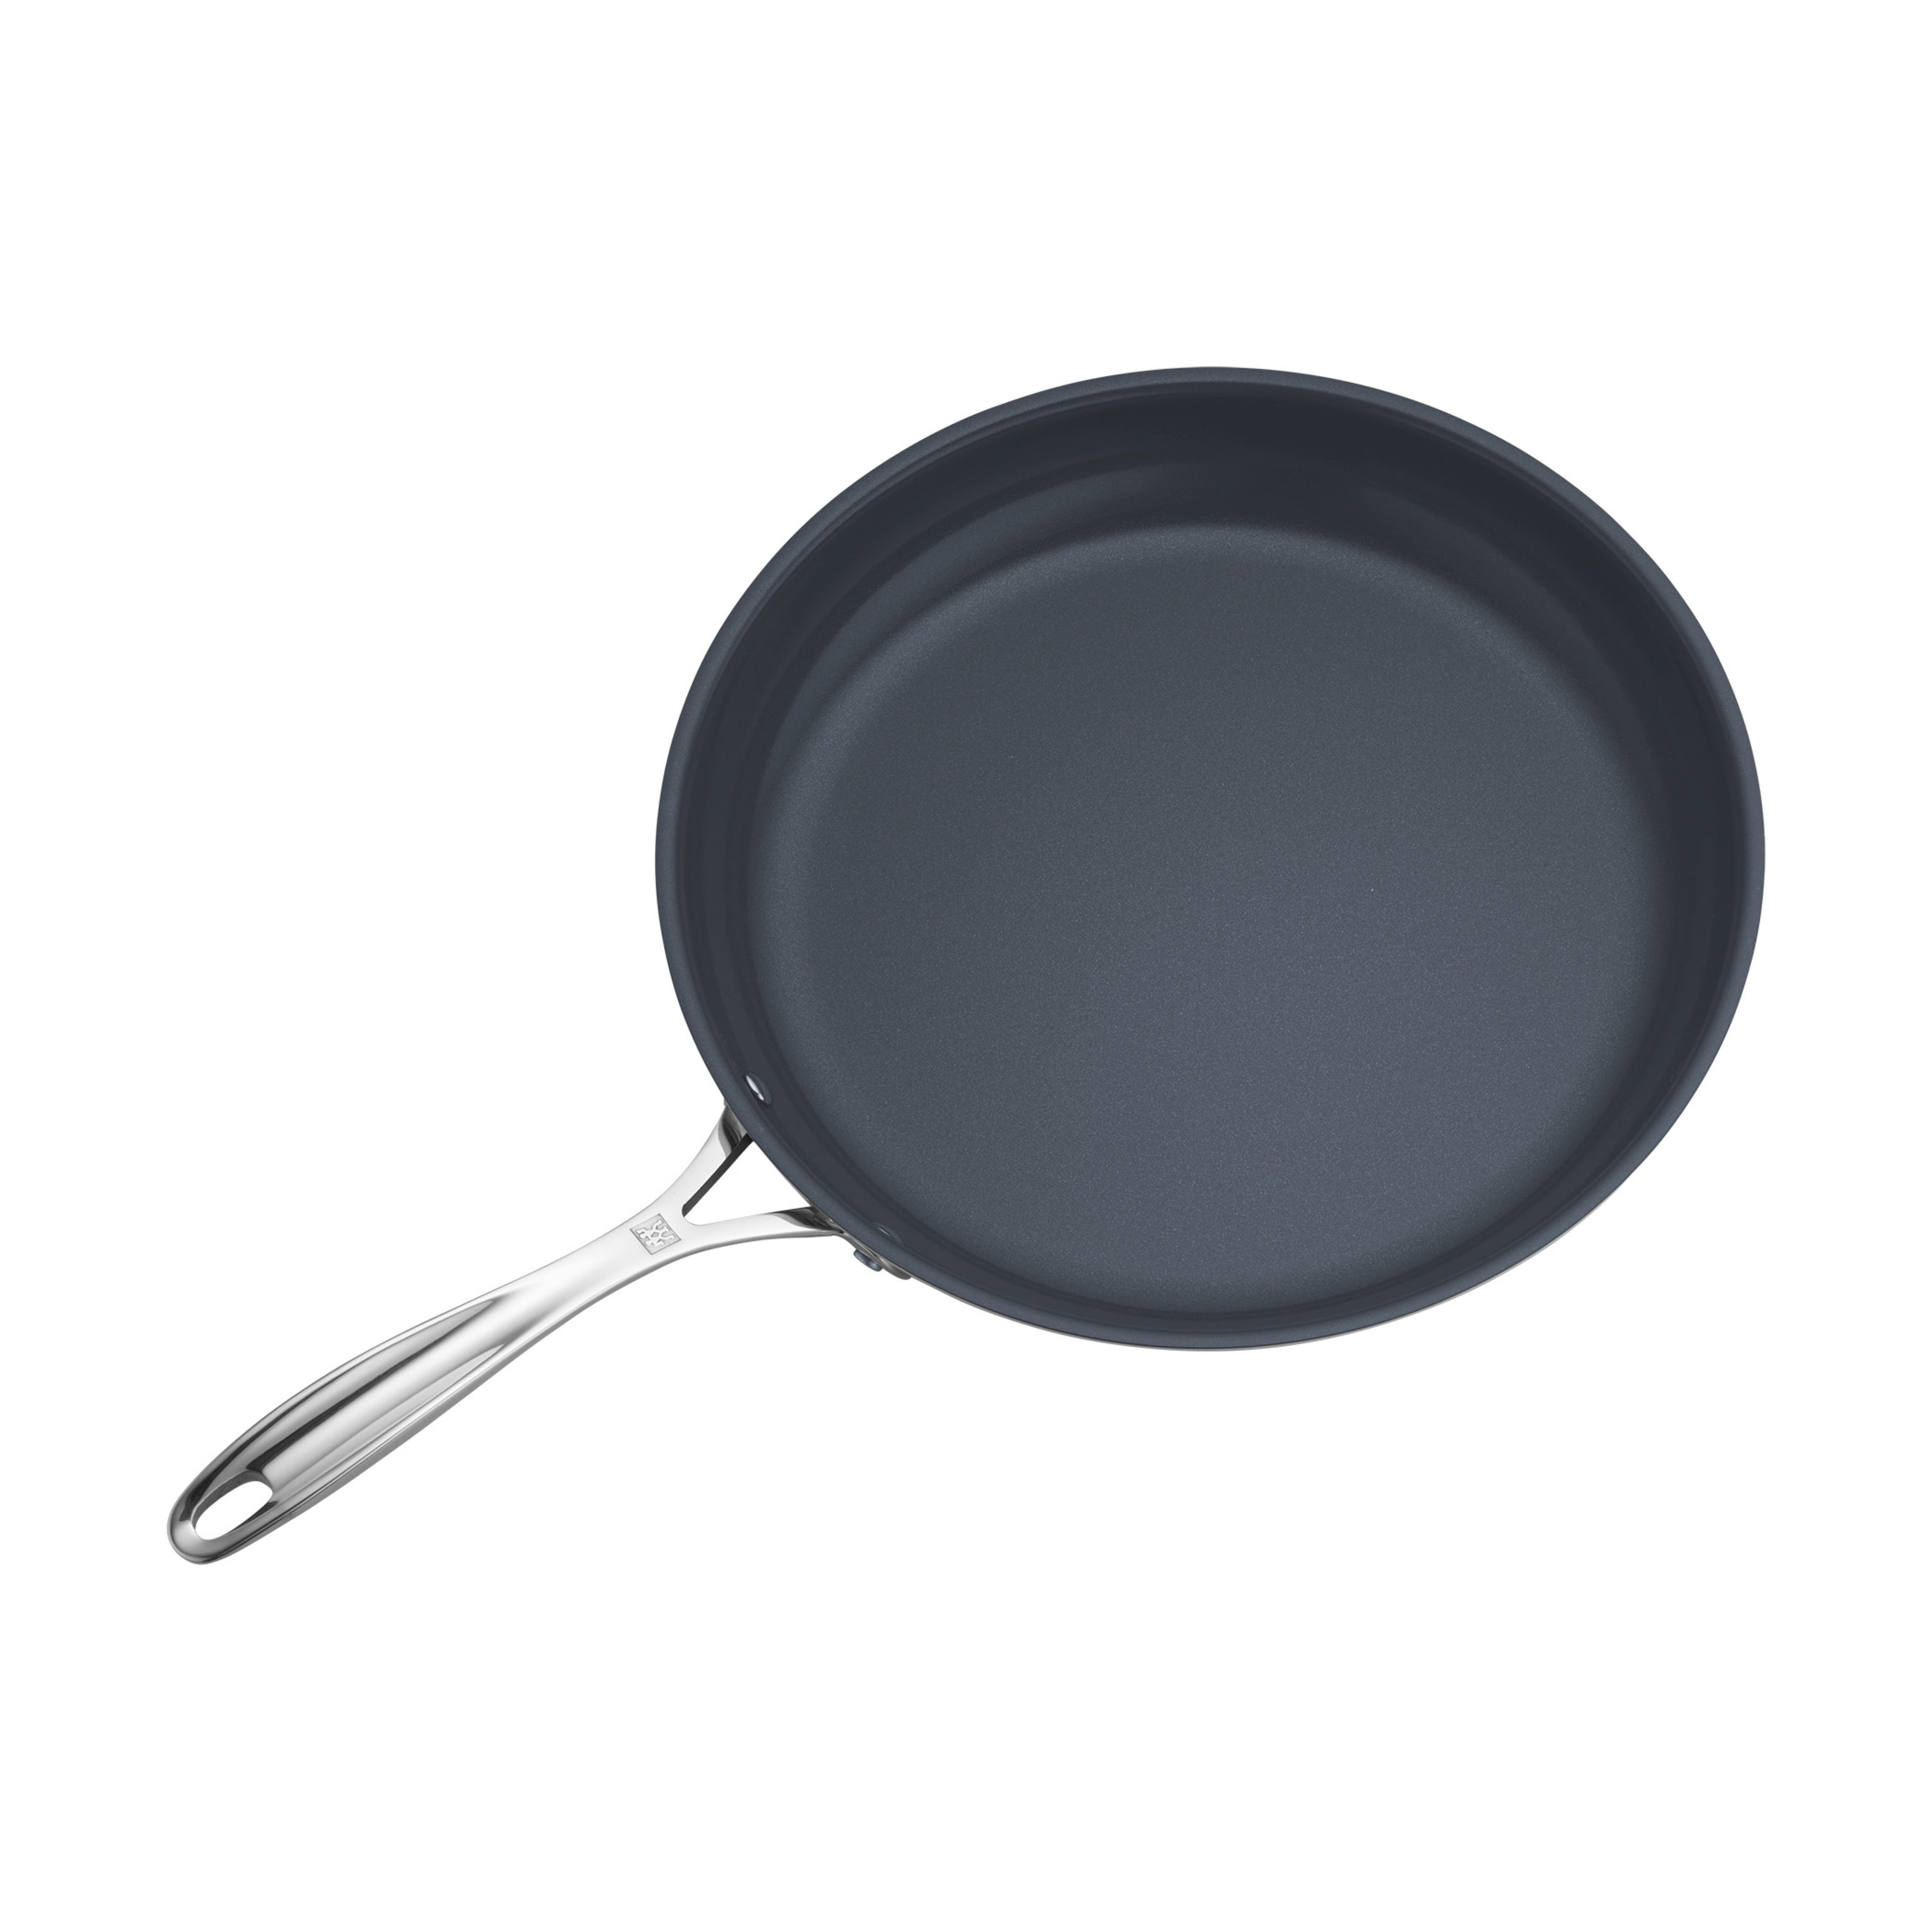 ZWILLING J.A. Henckels Clad Xtreme 12 Ceramic Fry Pan + Reviews